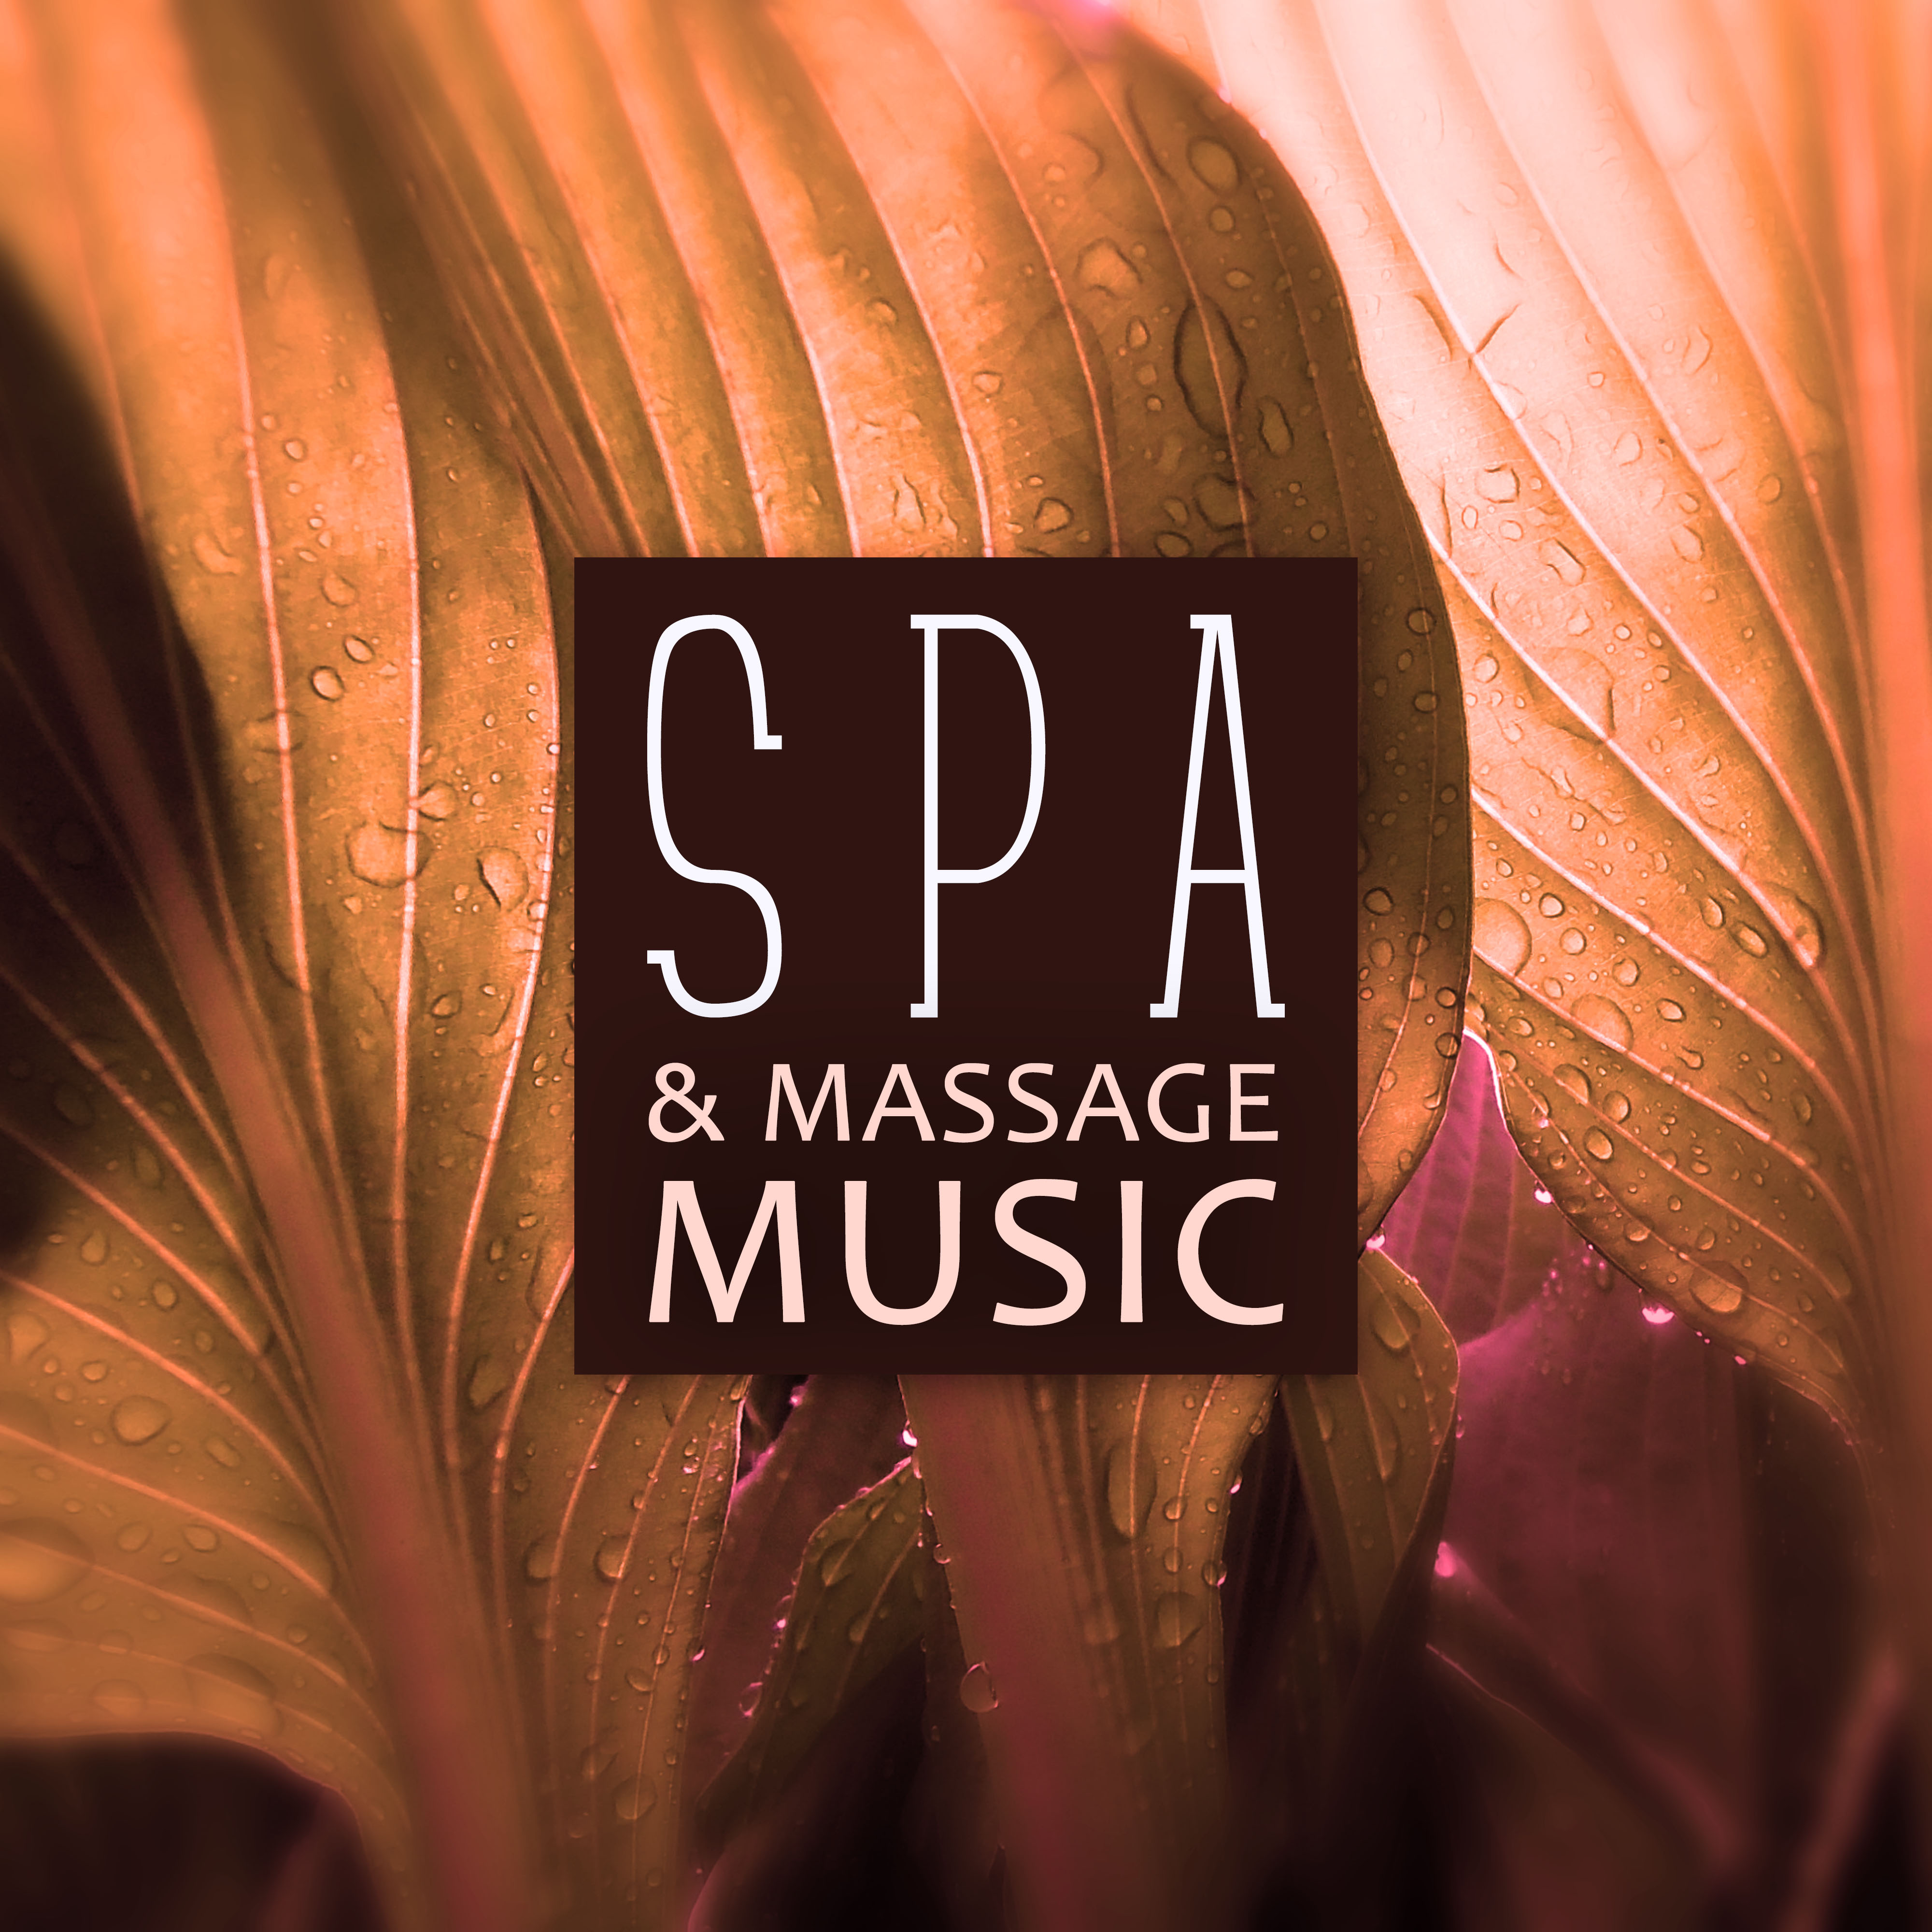 Spa & Massage Music - Smooth Background Music with Nature Sounds for Aromaterapy, Shiatsu and Acupressure, Healing by Touch, Deep Meditation and Relaxation